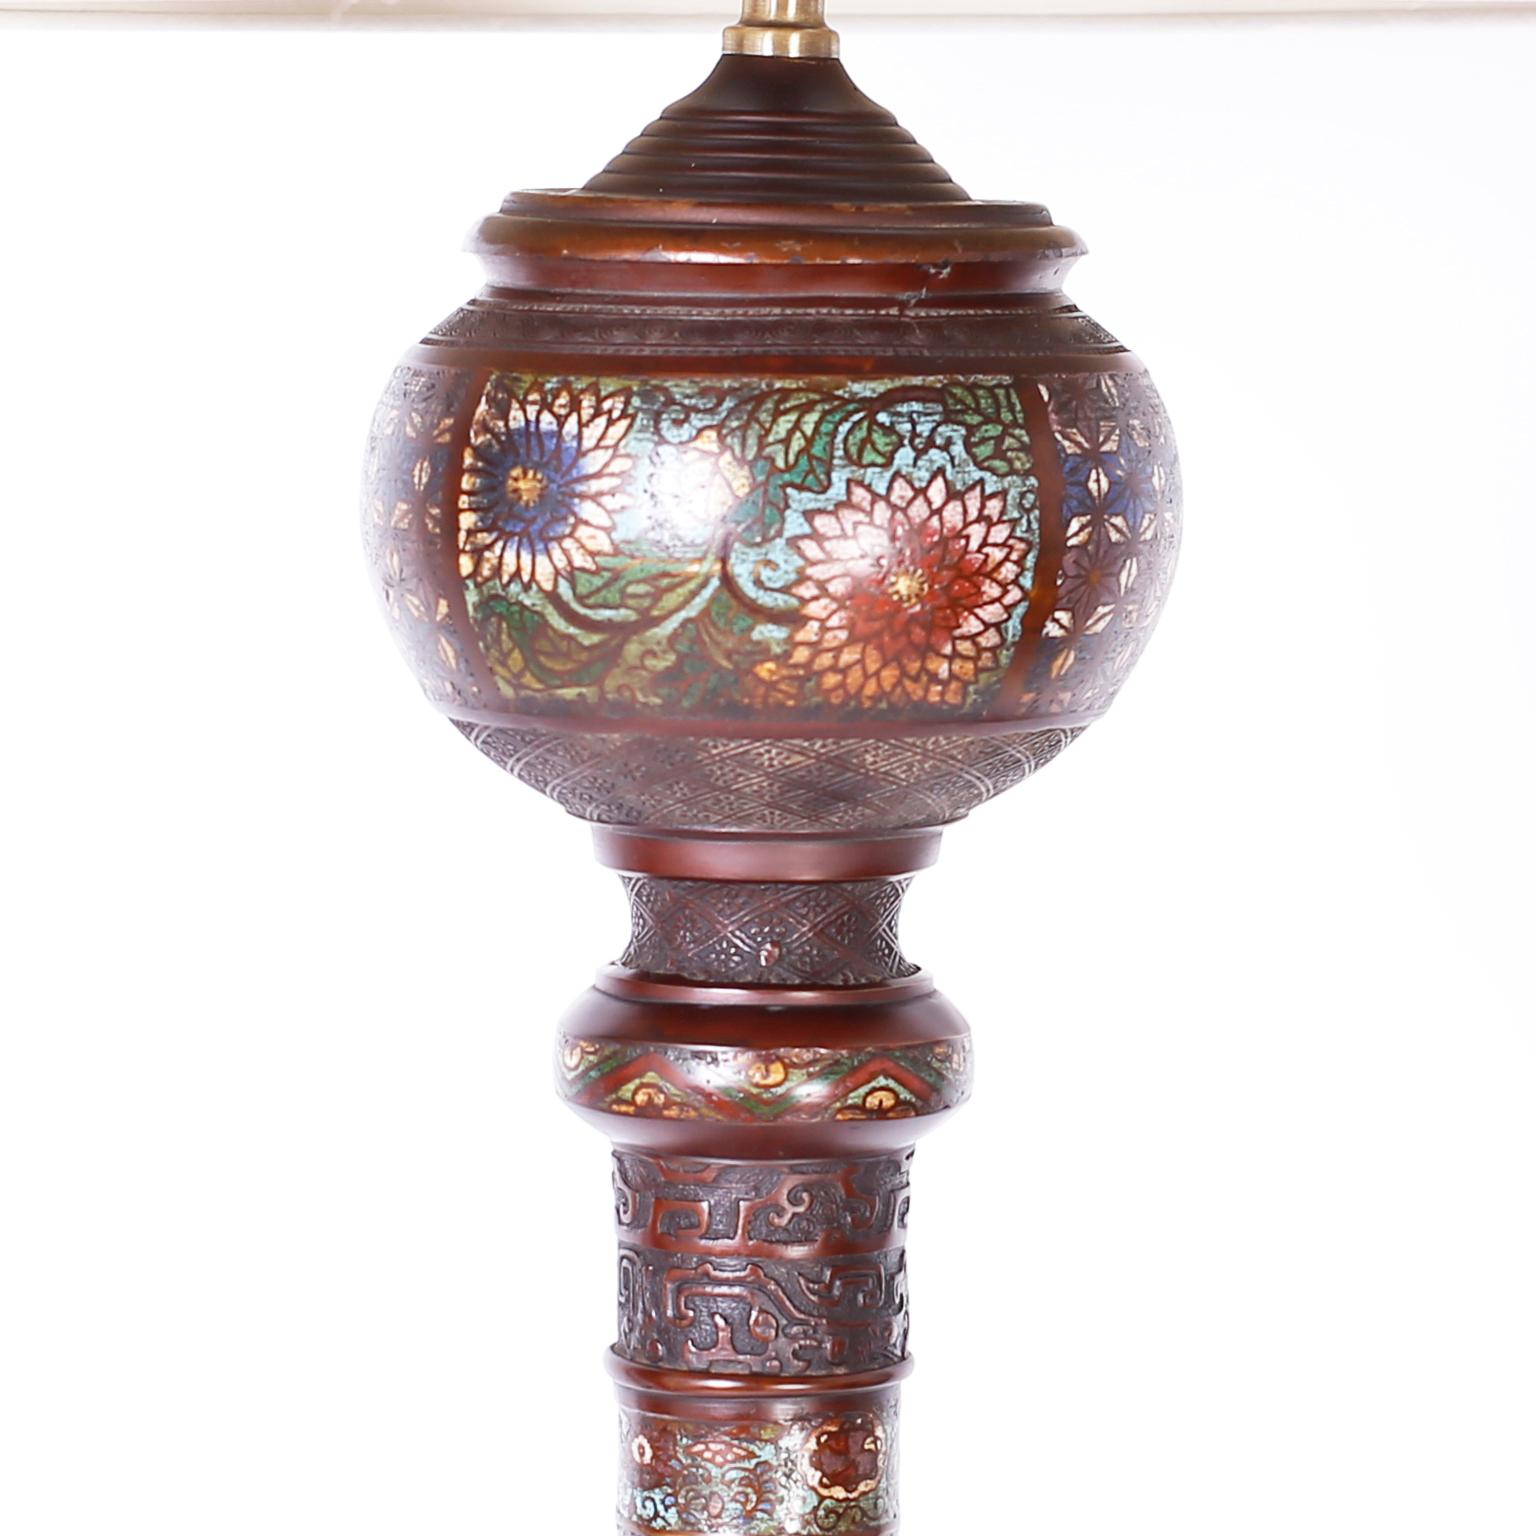 Impressive antique Japanese champleve floor lamp, in the Orientalist manner, with an elegant form and a dark lush patina, decorated with stylized floral designs and featuring an elephant base on a round plateau.